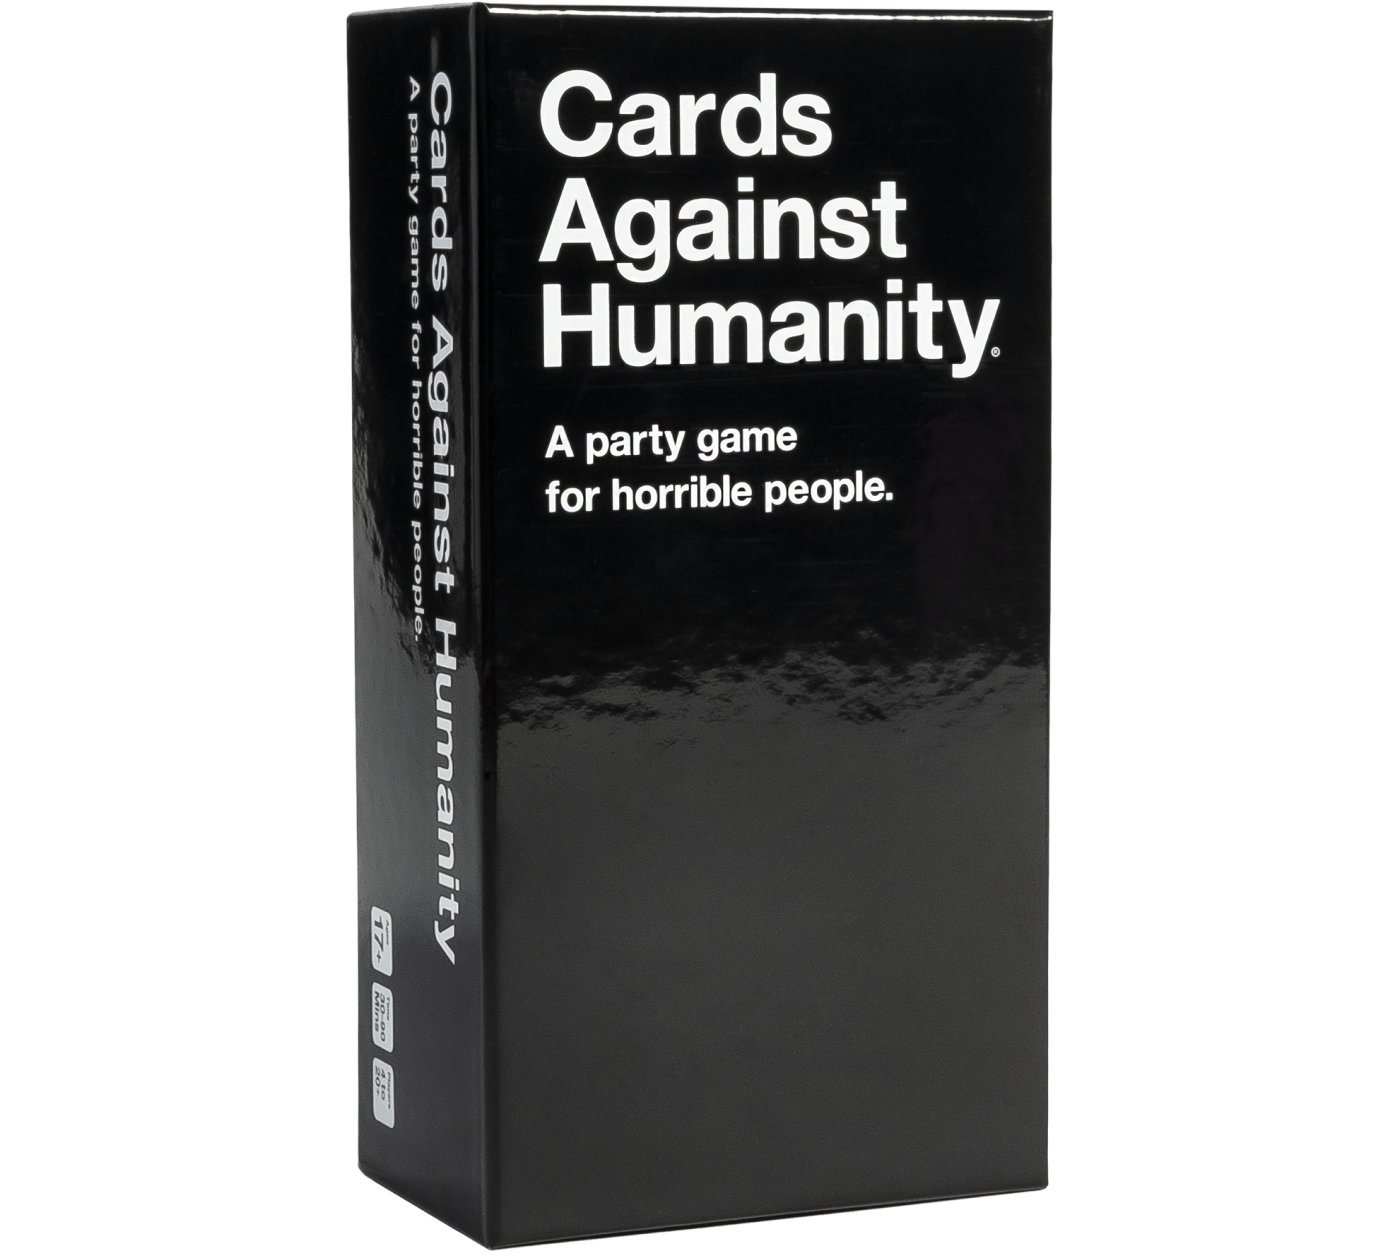 2013 Holiday Expansion Pack NIB Cards Against Humanity 